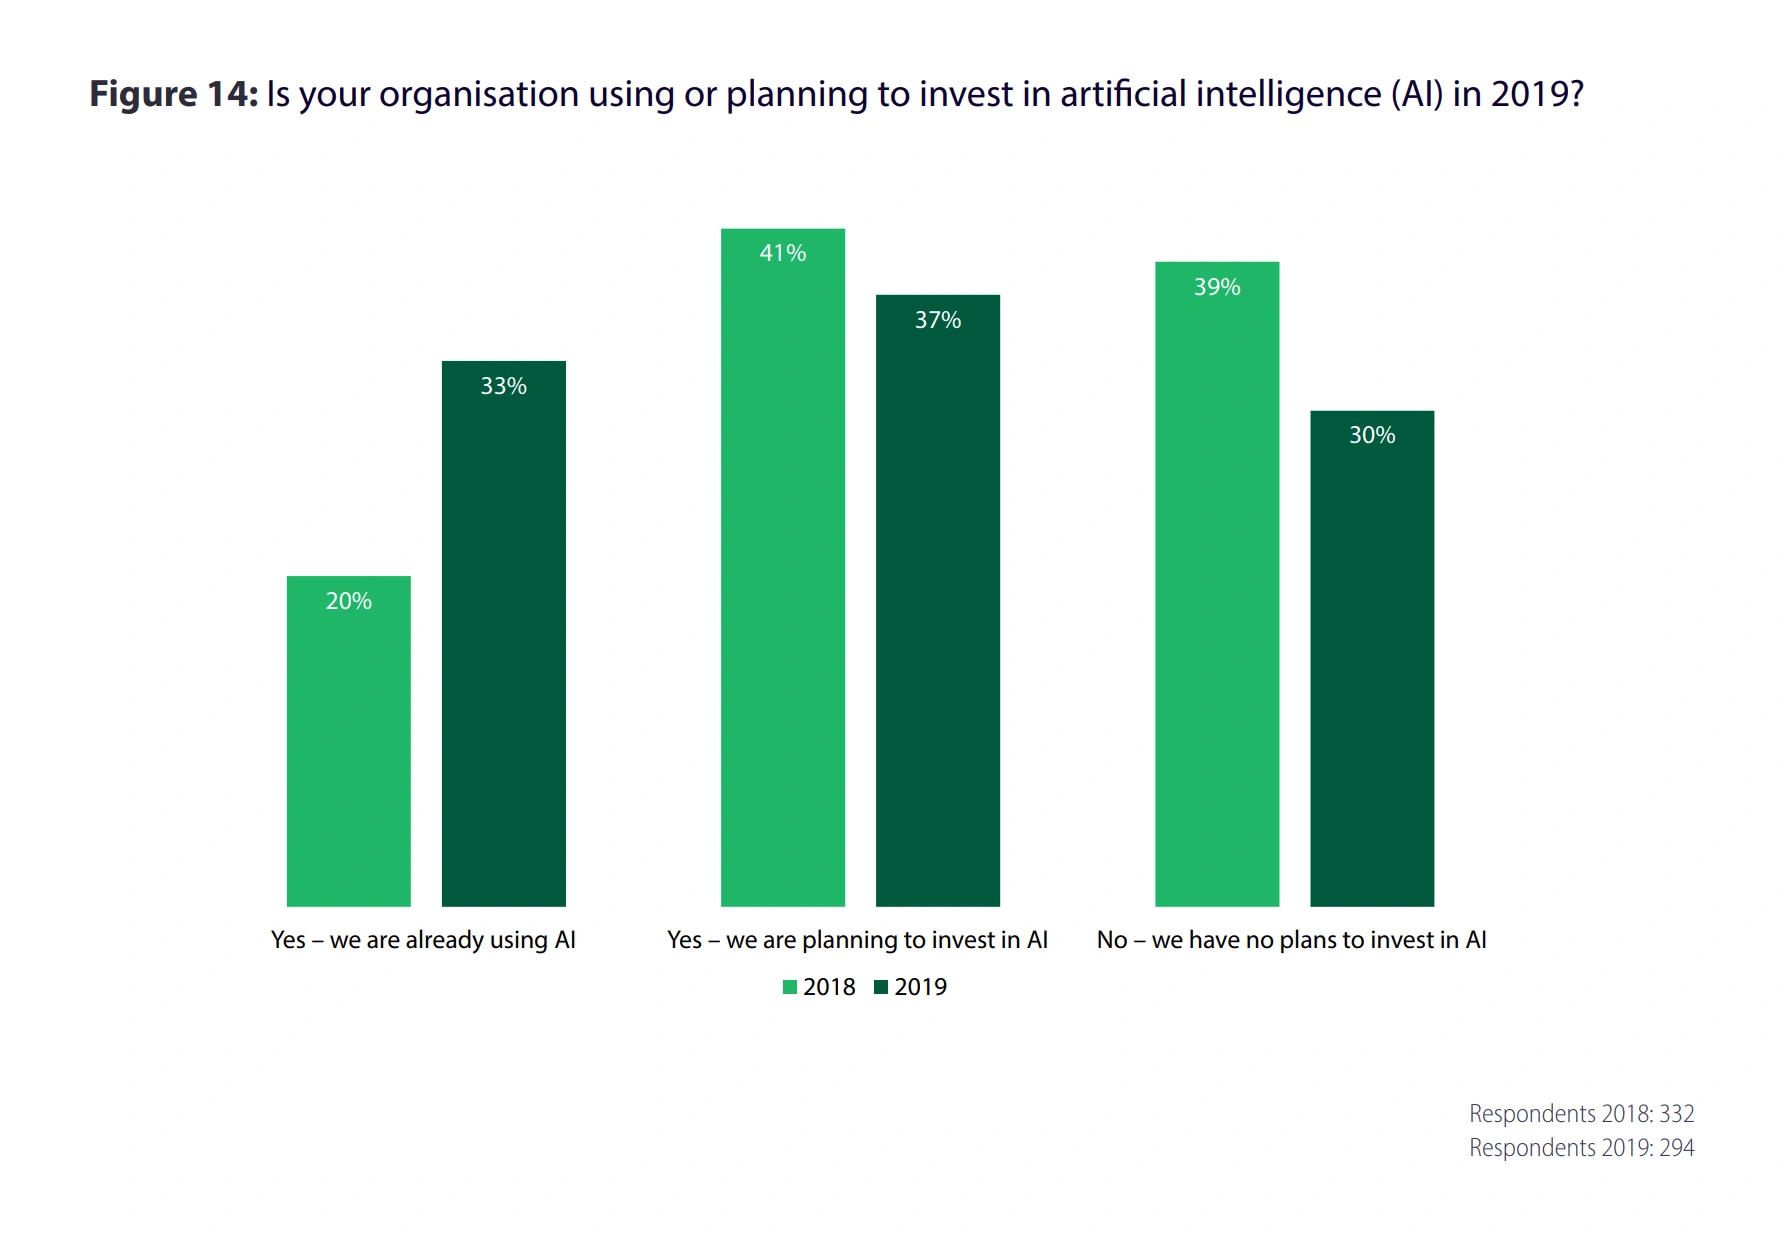 AI adoption in organization from 2018 to 2019